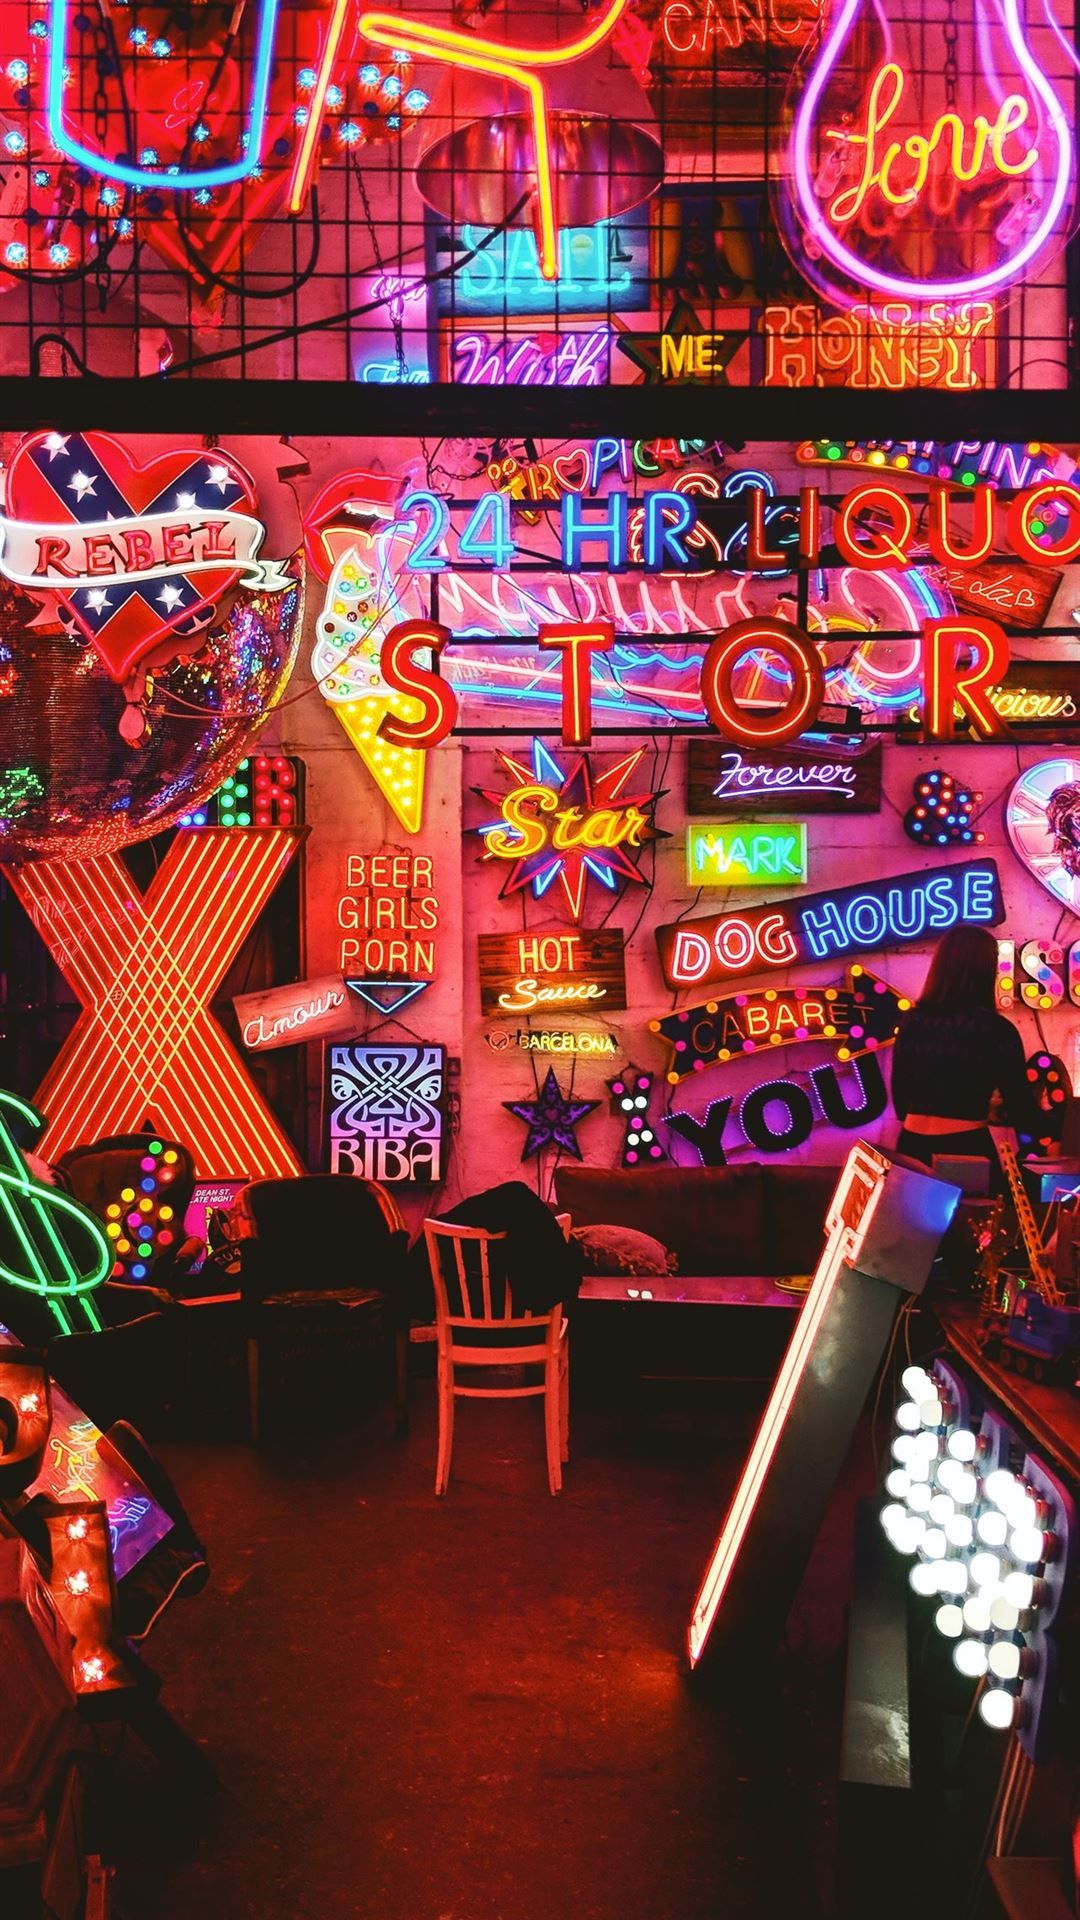 A neon sign room with a chair and tables - Arcade